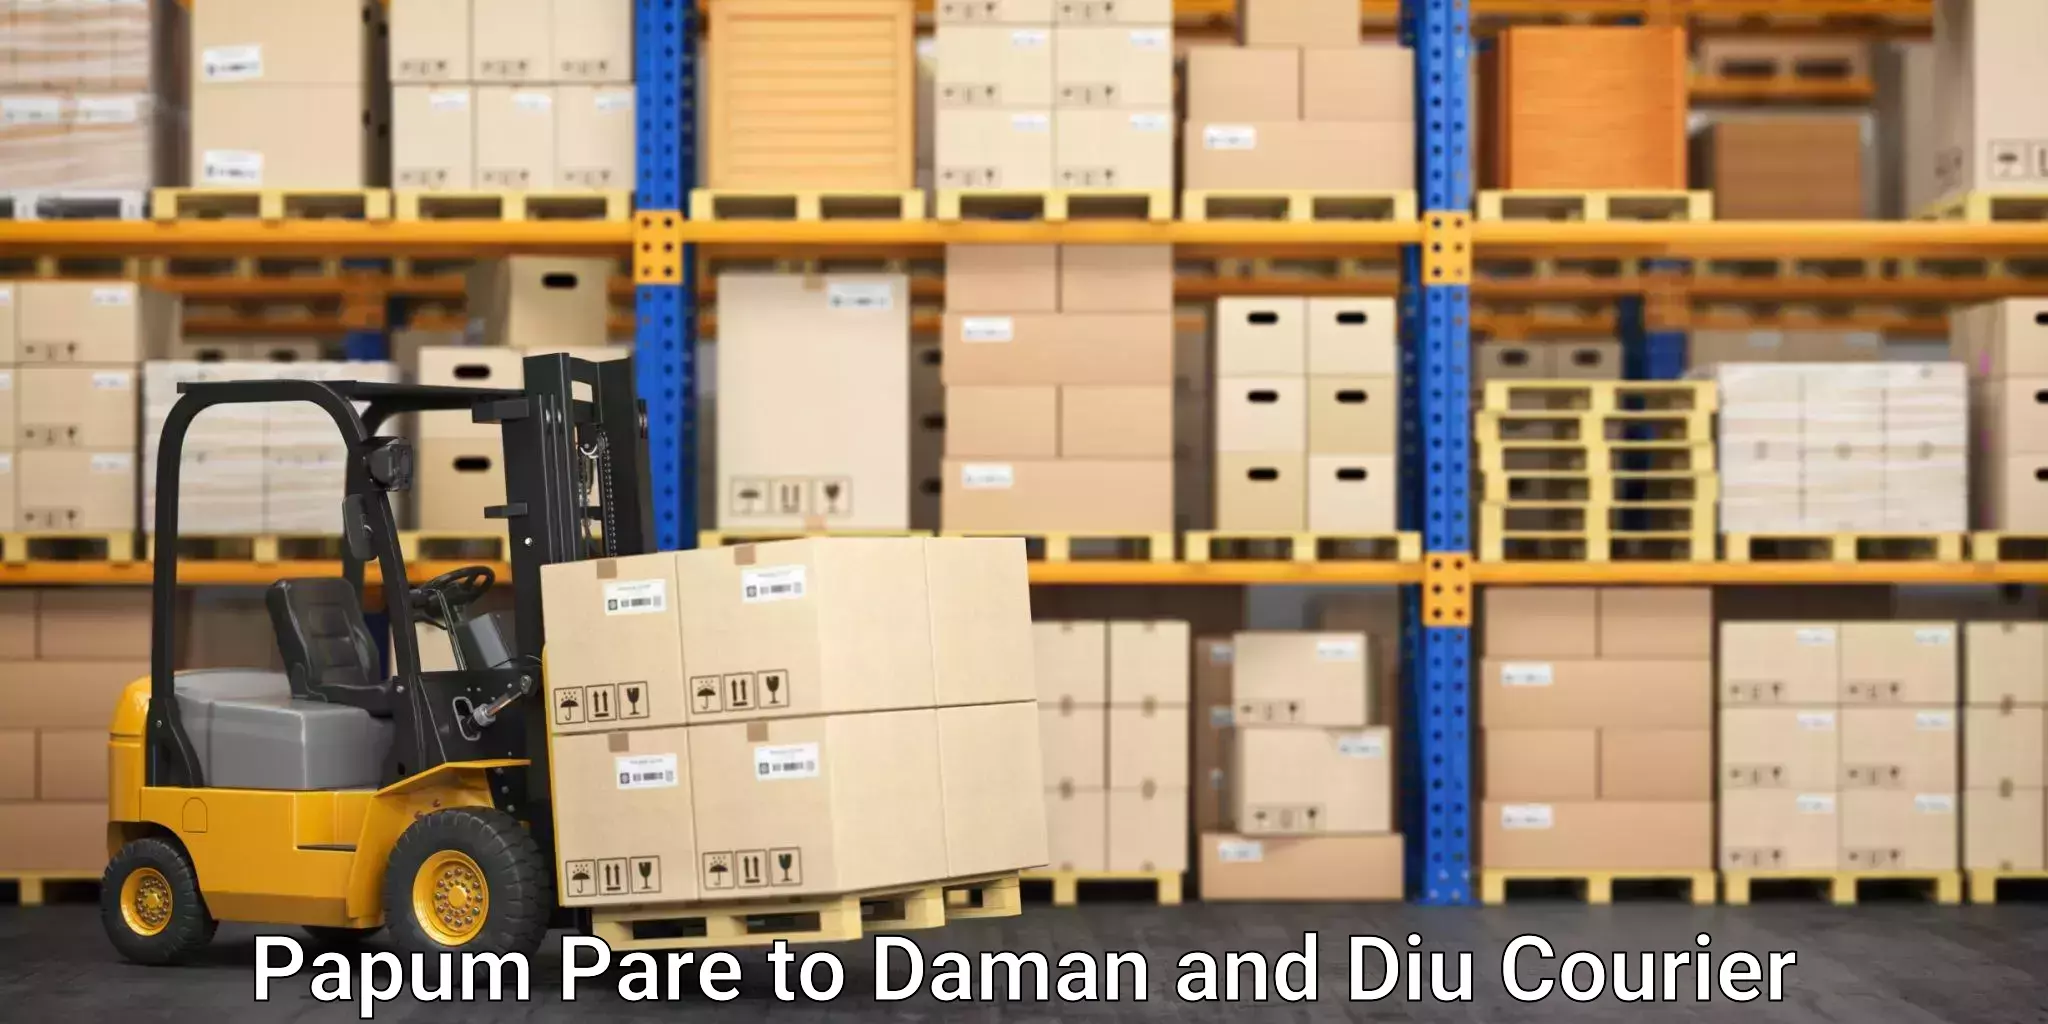 24/7 shipping services Papum Pare to Daman and Diu